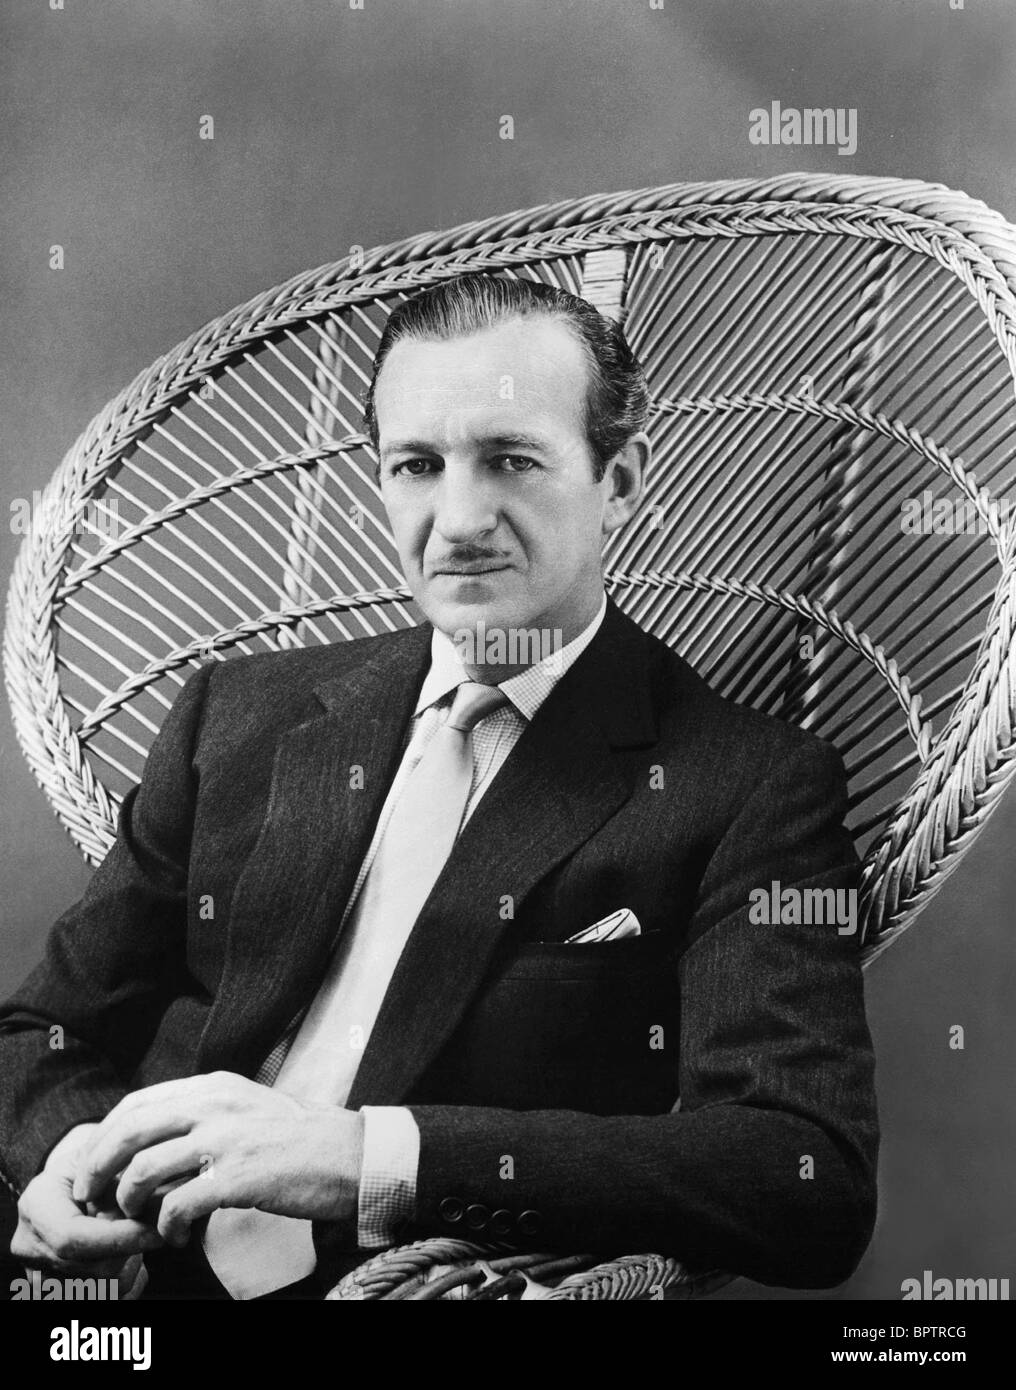 David Niven, Movie Star Painting by Esoterica Art Agency - Fine